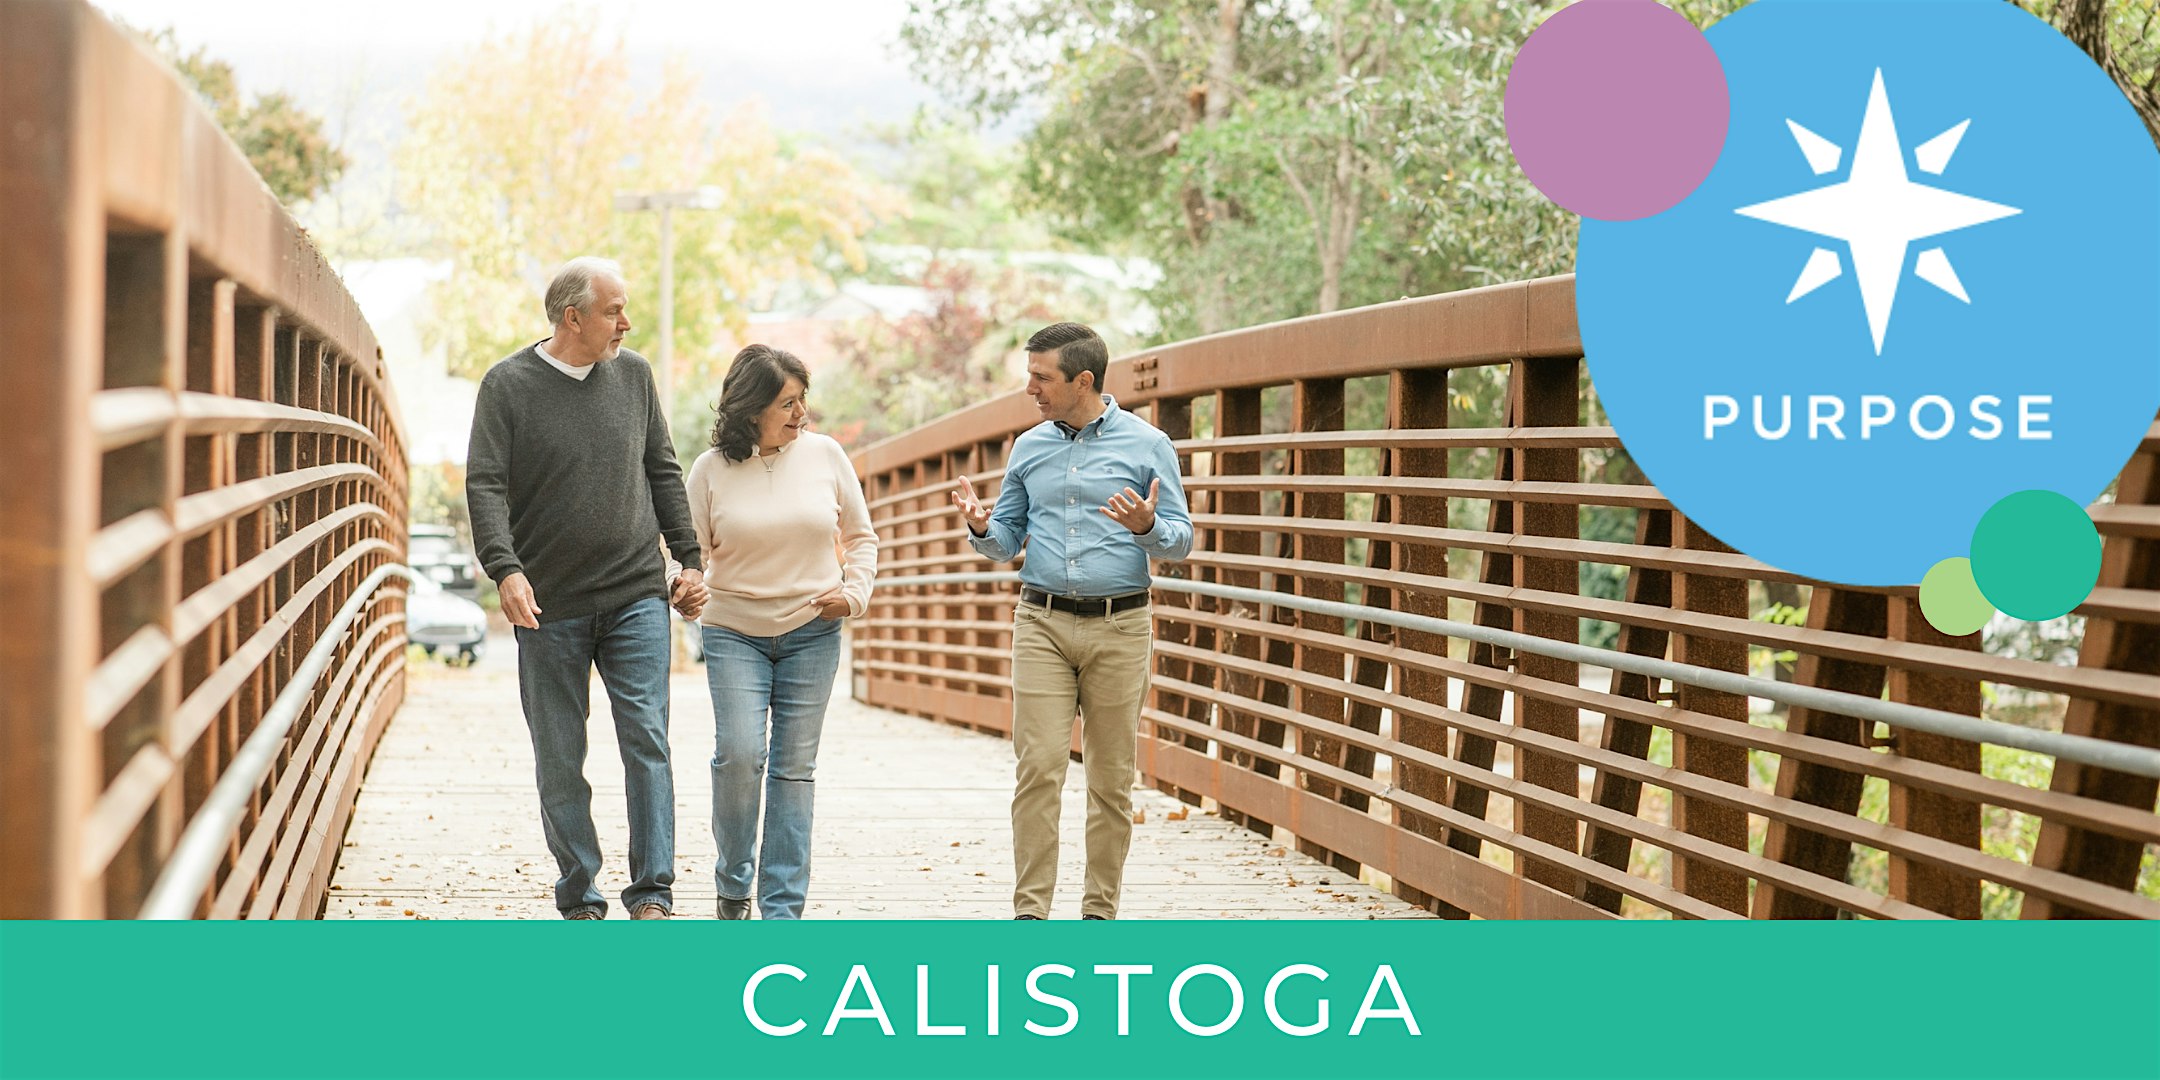 Calistoga Wellness Week: Purpose Workshop with Blue Zones Project UNV